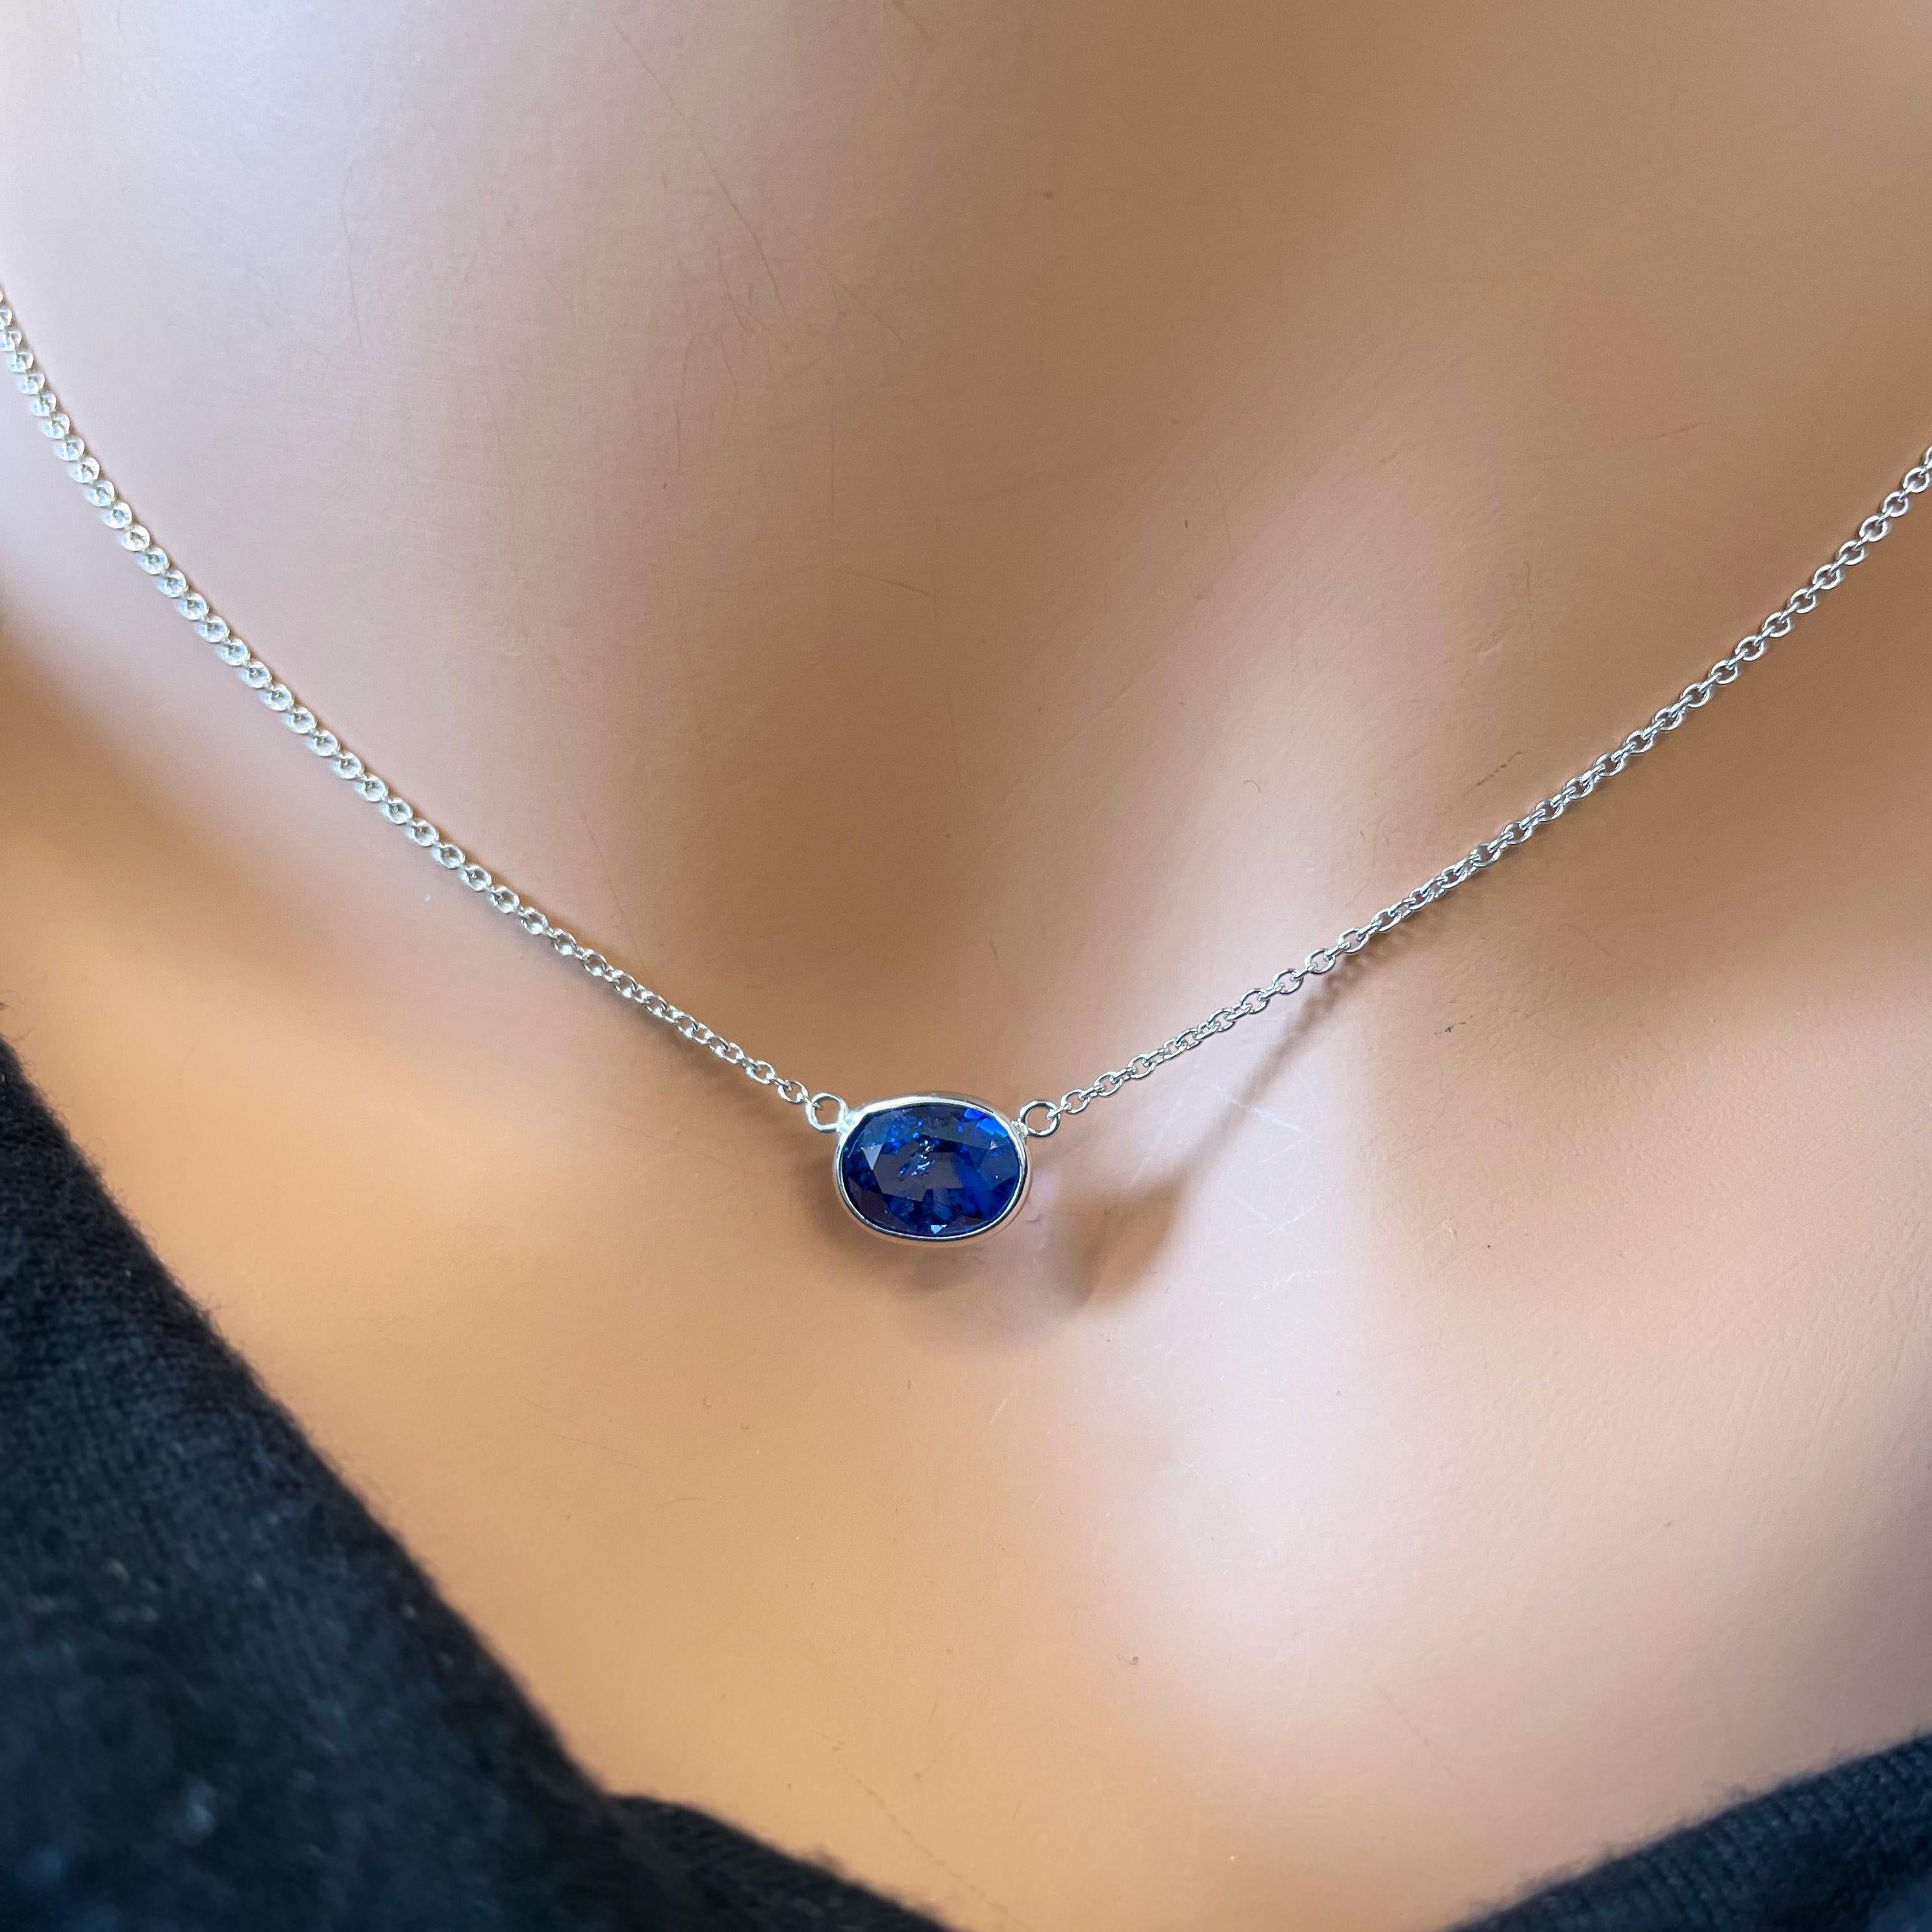 This necklace features an oval-cut blue sapphire with a weight of 2.29 carats, set in 14k white gold (WG). Blue sapphires are known for their deep, rich blue color, and the oval cut is a classic and elegant choice for gemstones. Necklaces with blue